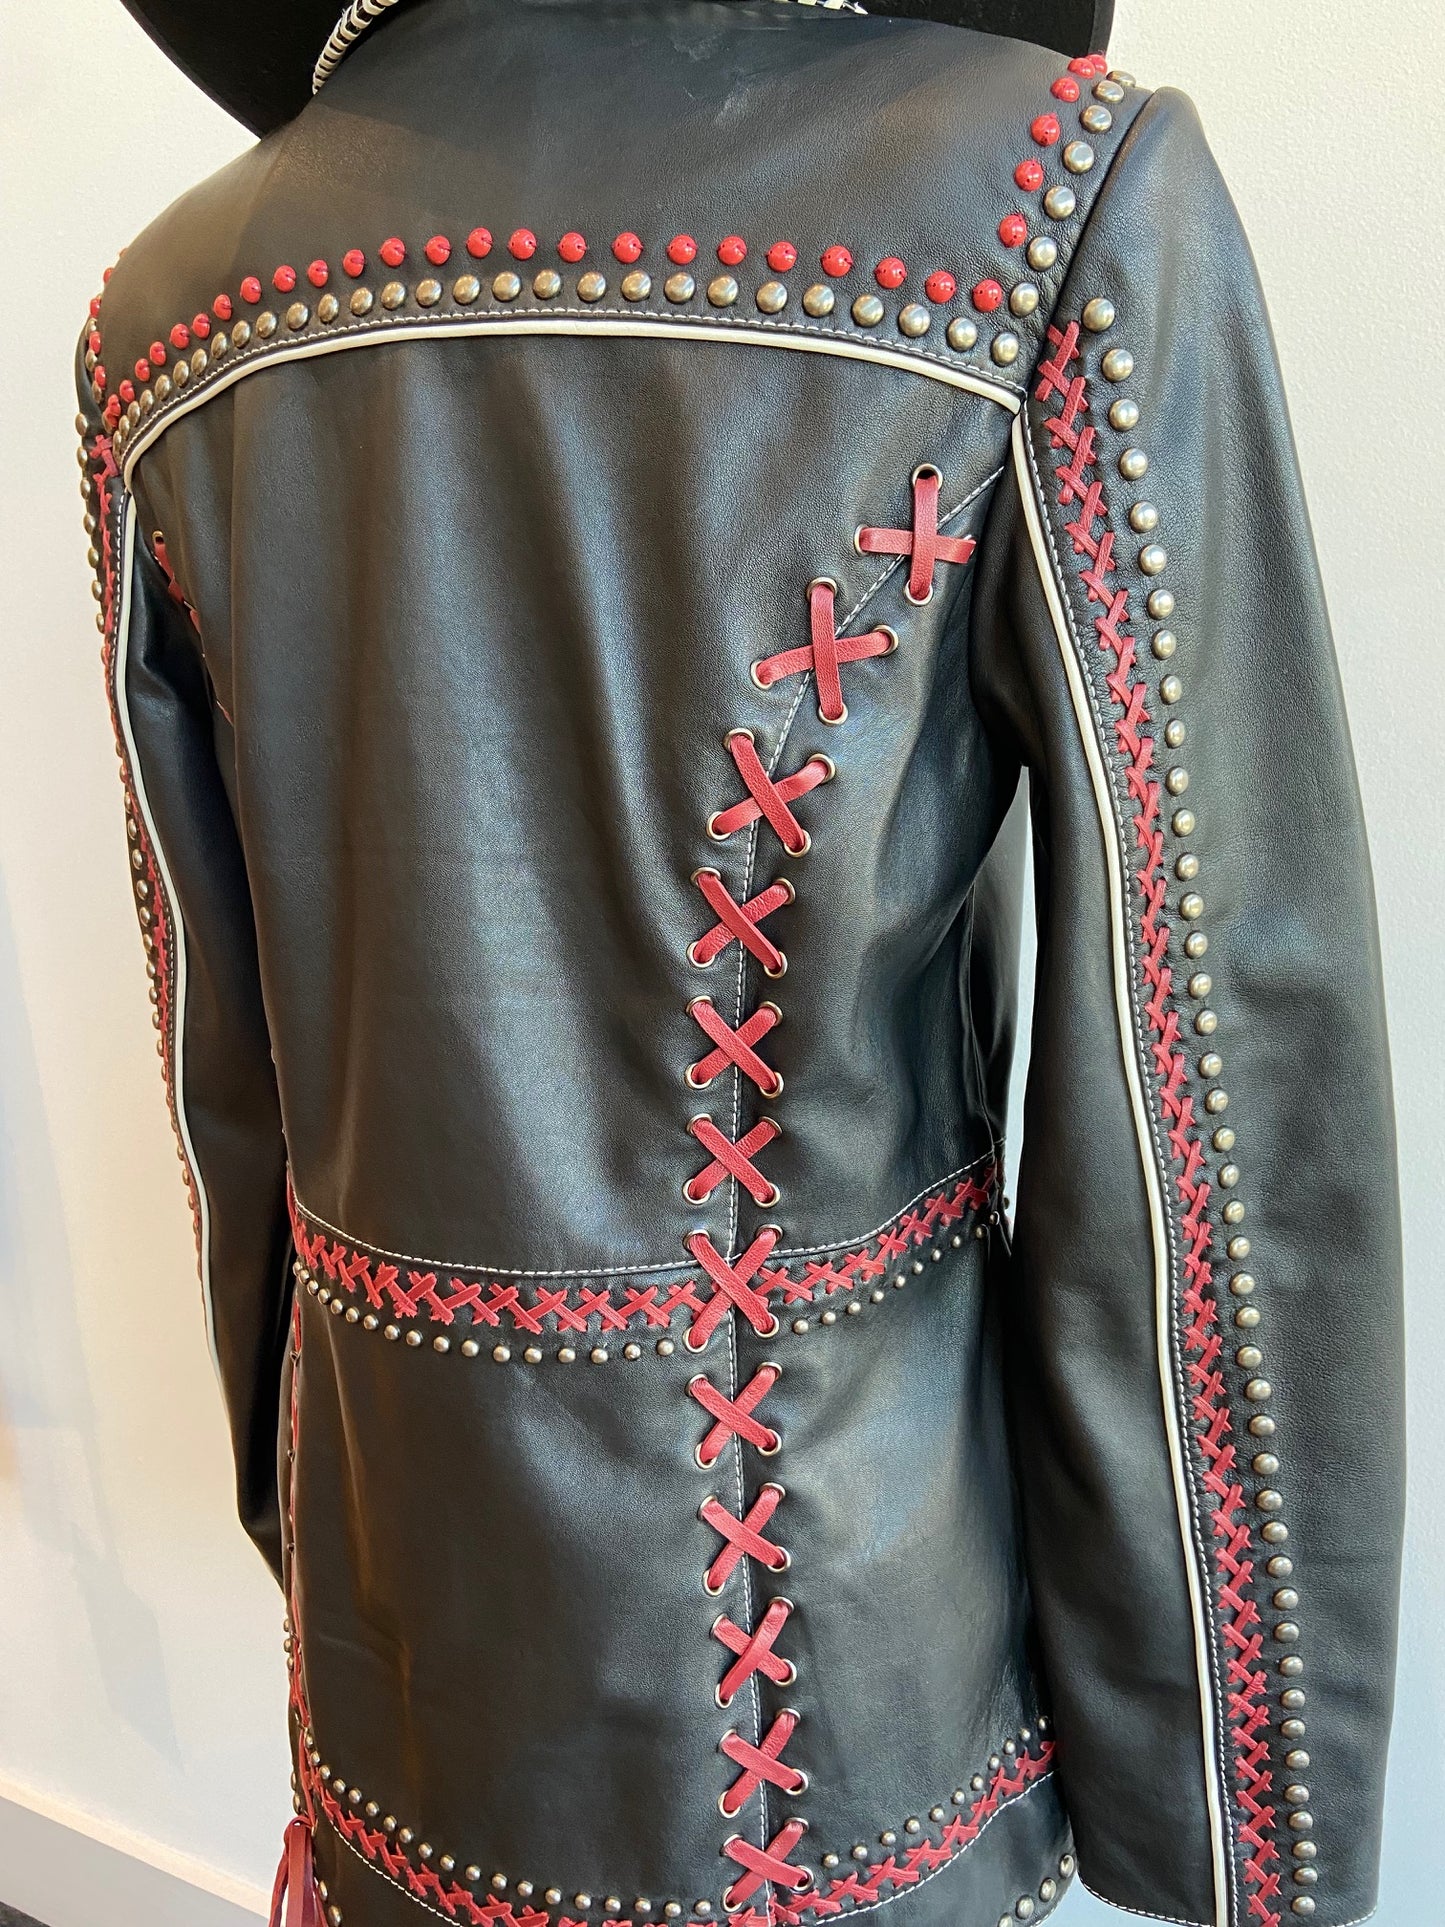 Double D Ranch - Emmy's Guitar Jacket